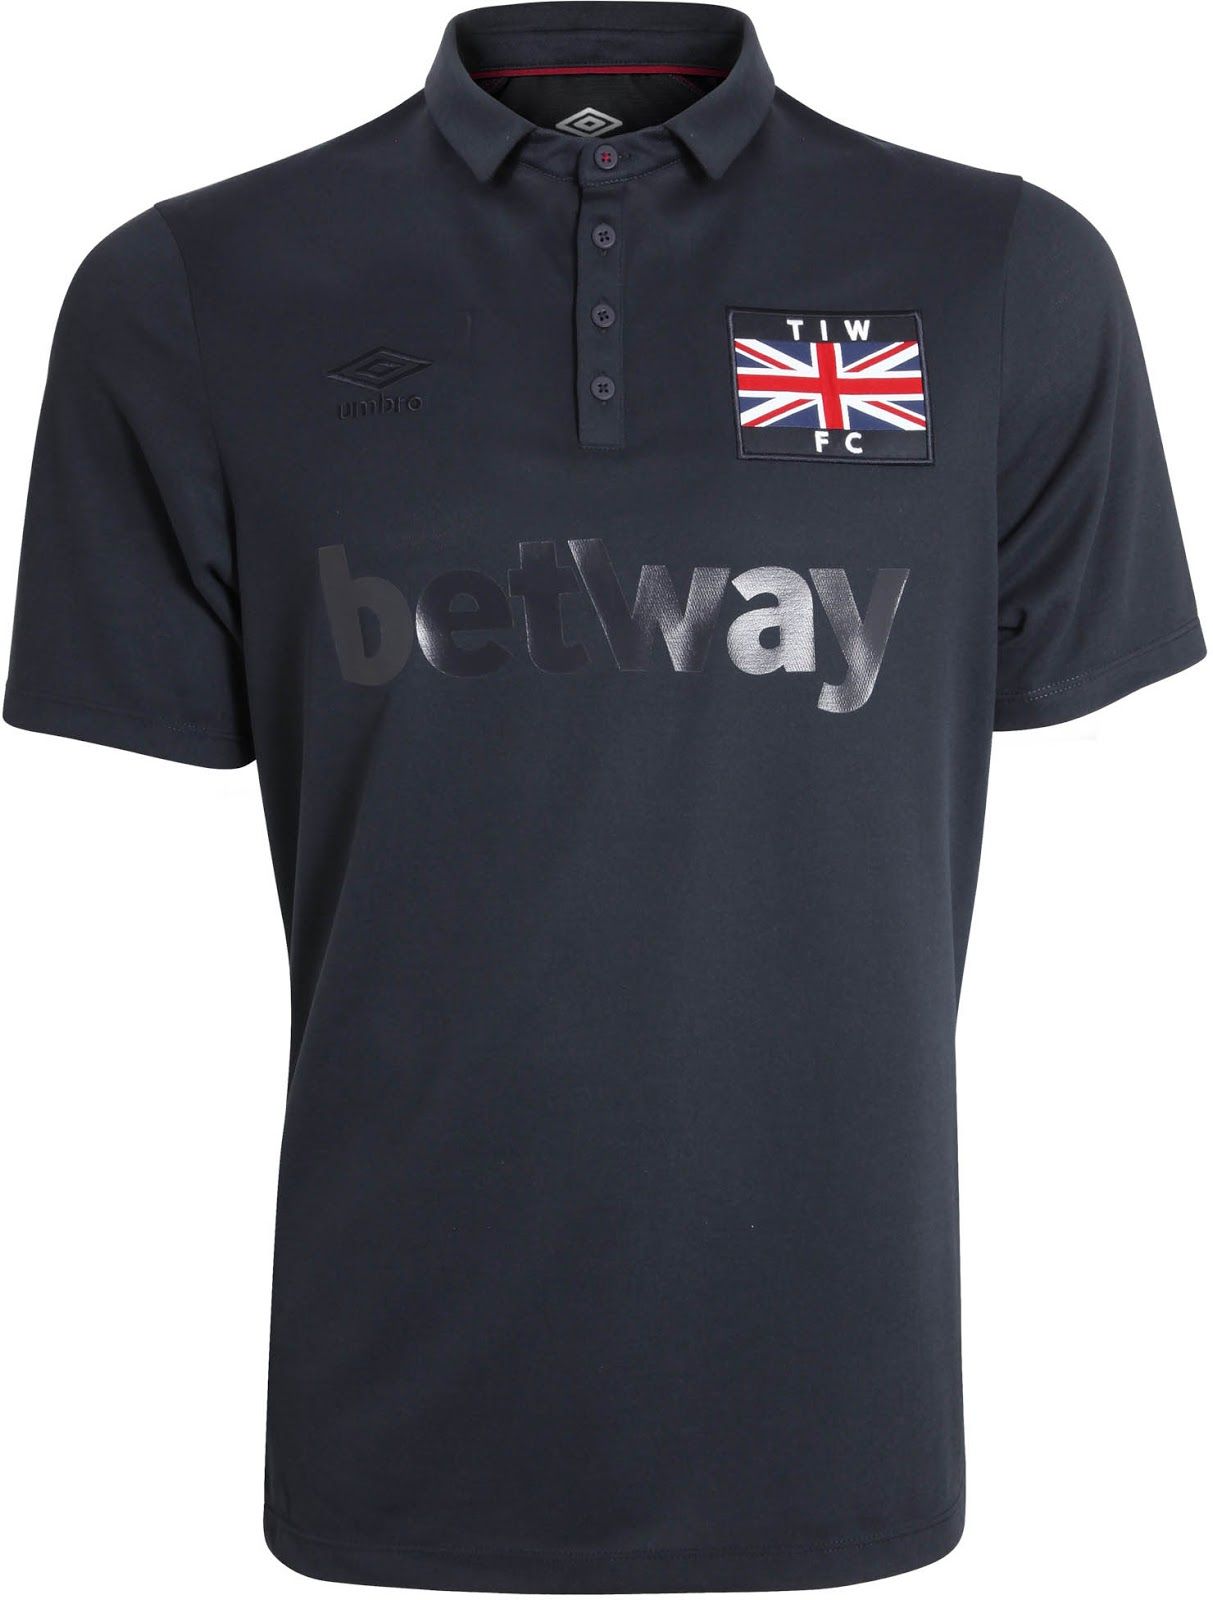 West Ham Fans Adore The Clubs New Retro Shirt For The